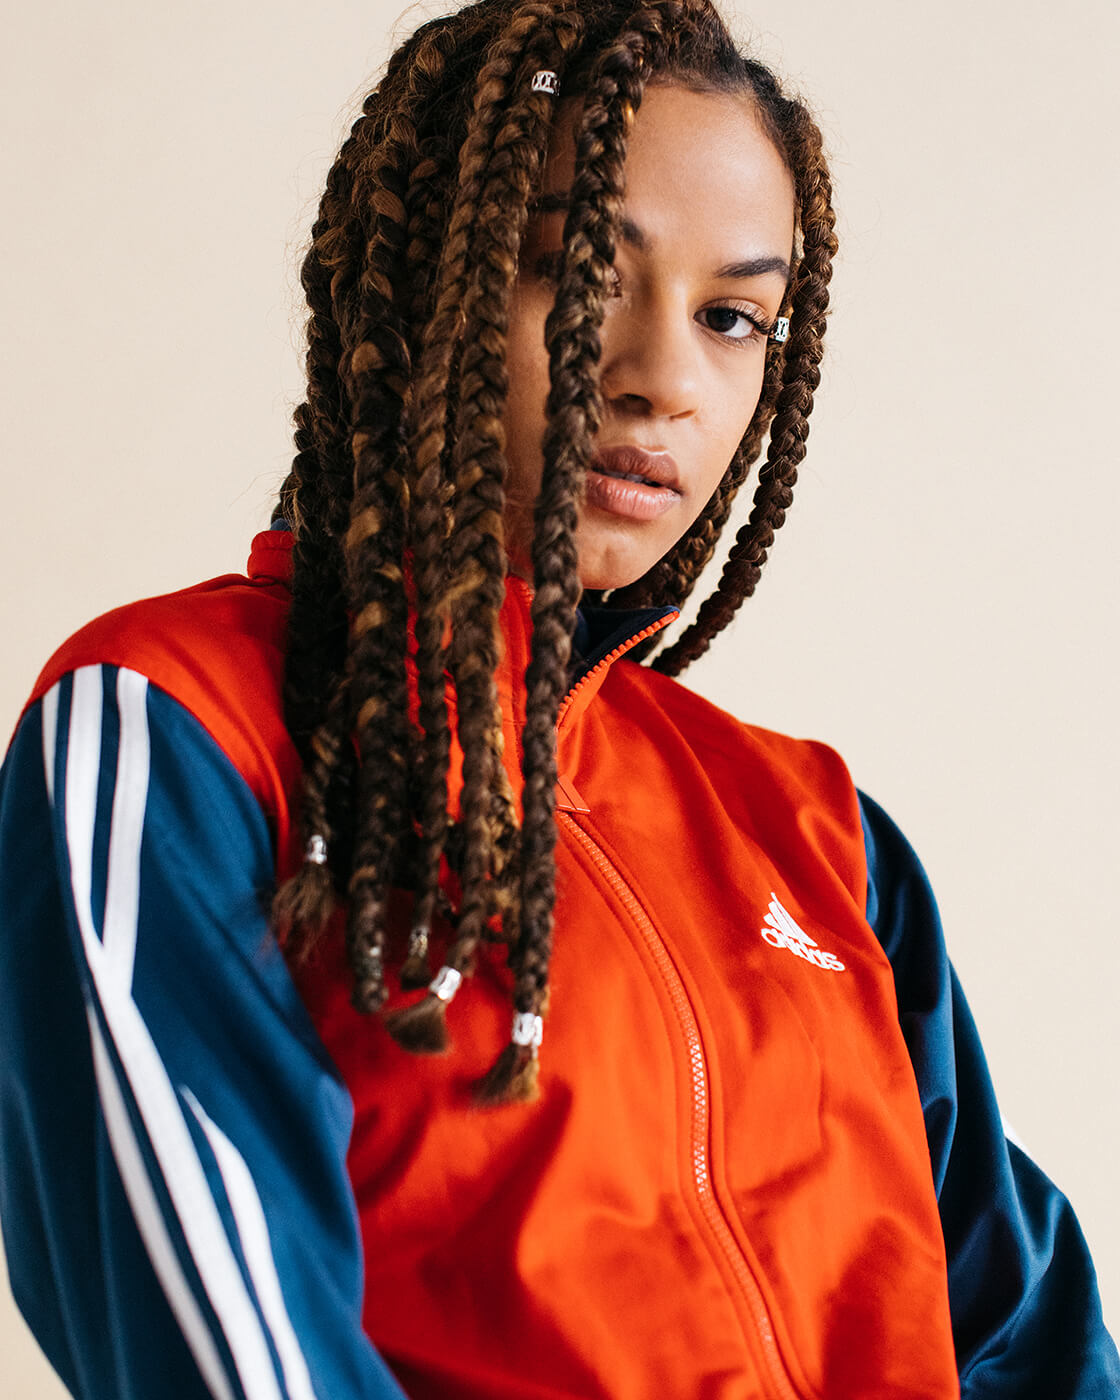 A colorfull portrait of a young girl wearing a red tracksuit